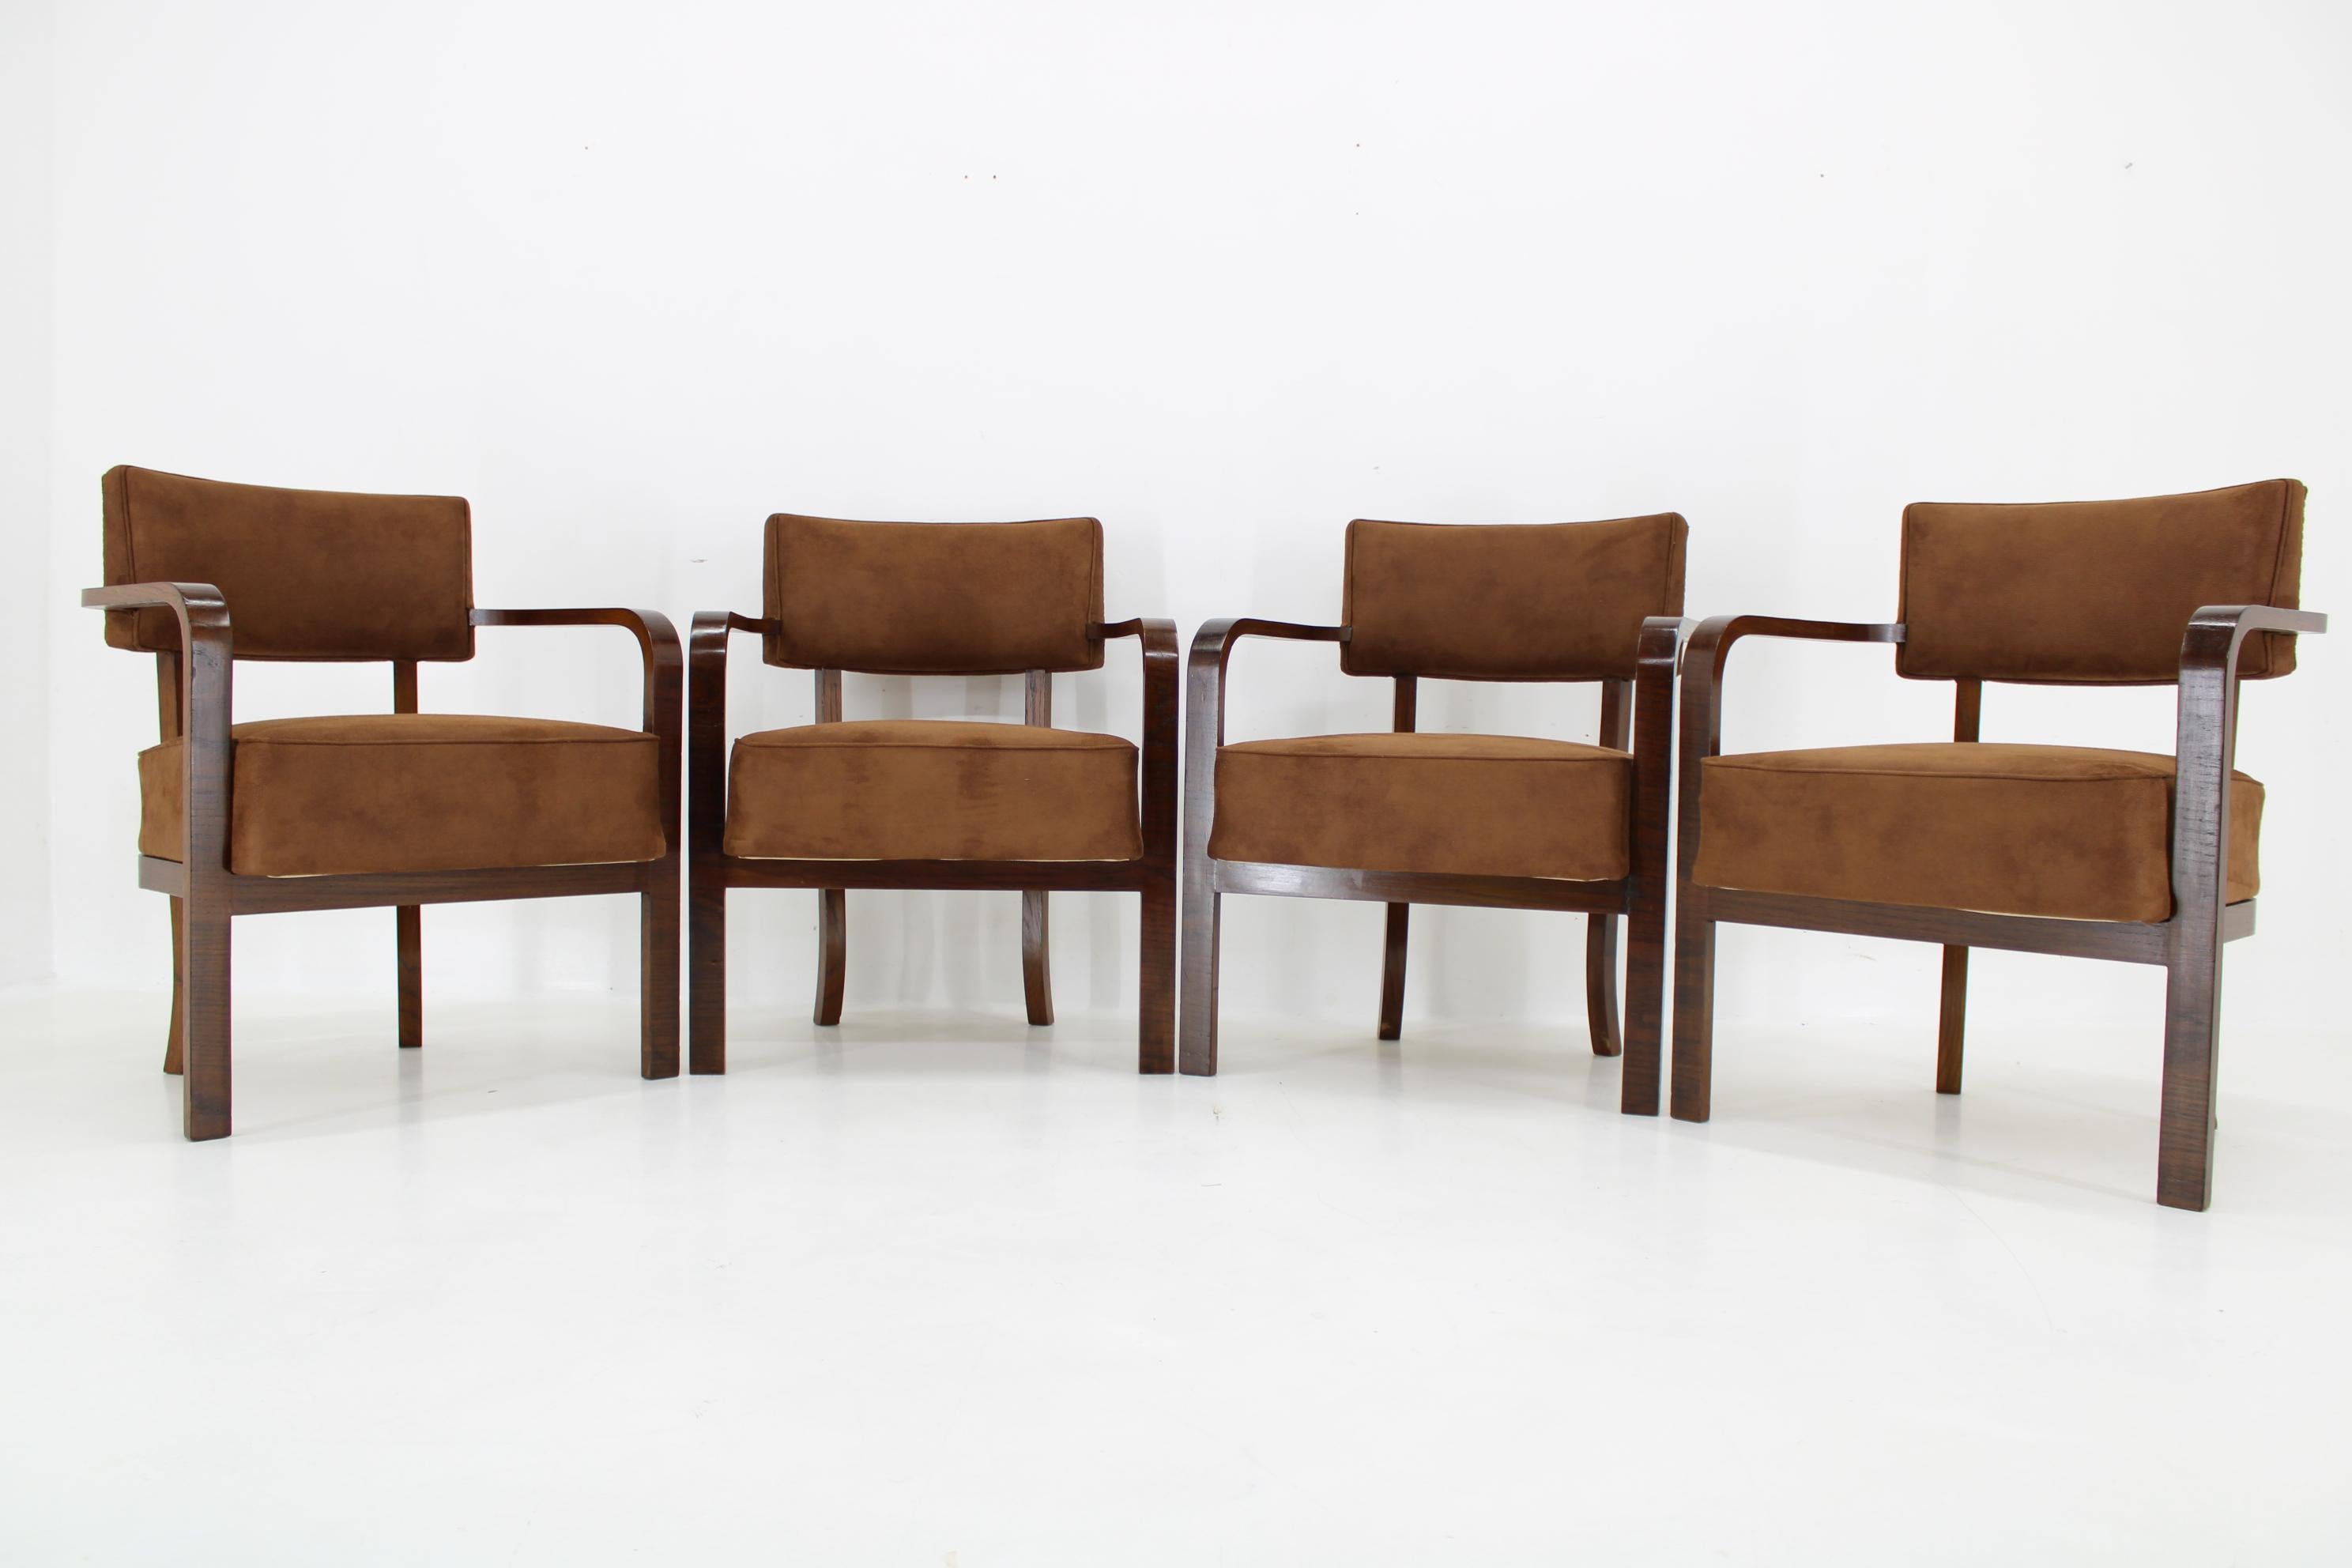 Czech 1930s Restored Art Deco Armchair, up to 4 pieces For Sale